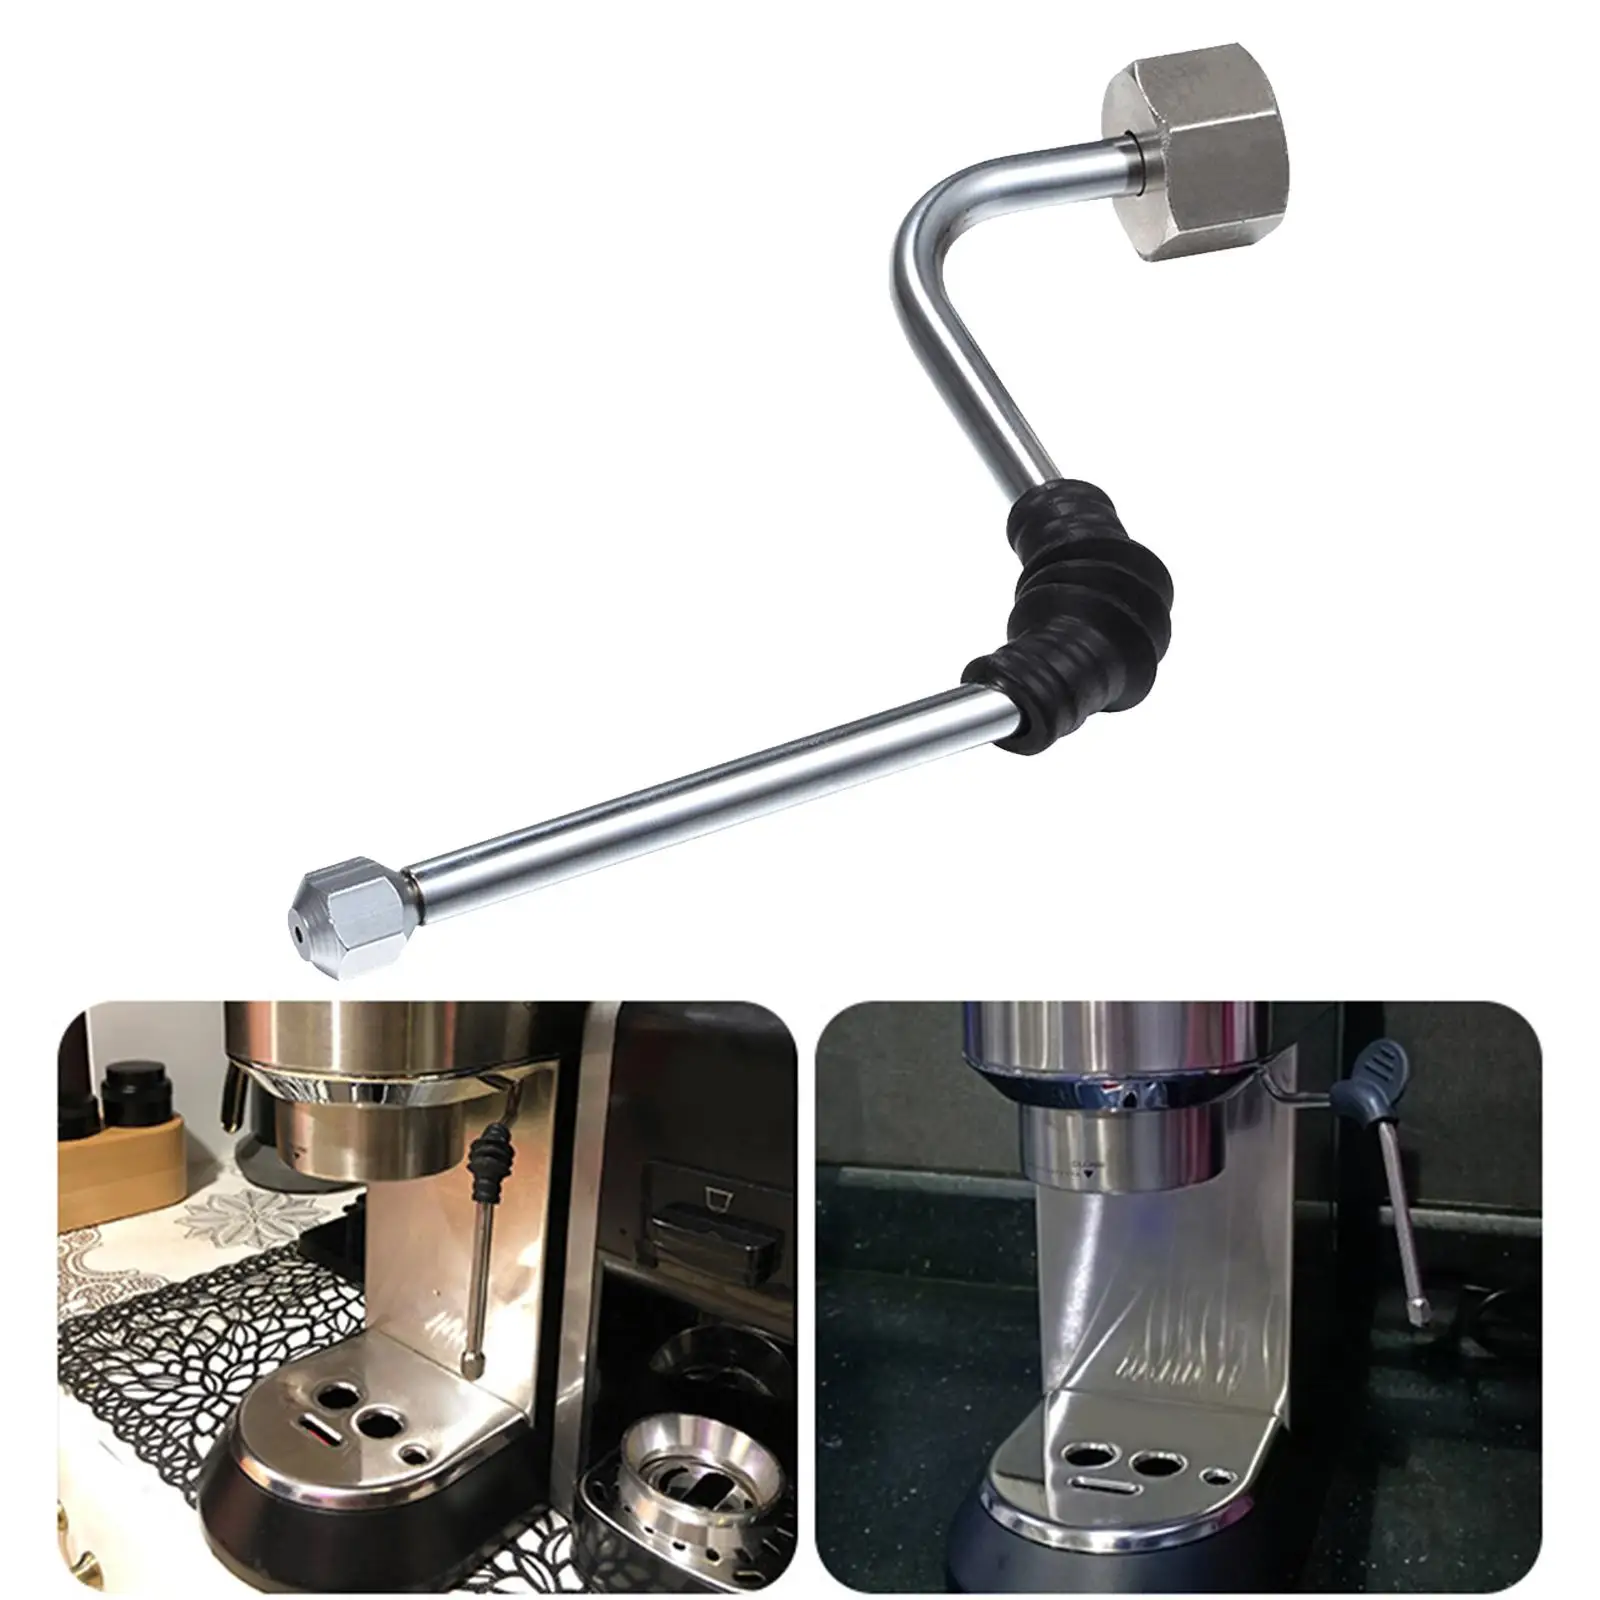 Premium Stainless Steel Tube for Enhanced Milk Frothing - 680/685 Coffee Accessories